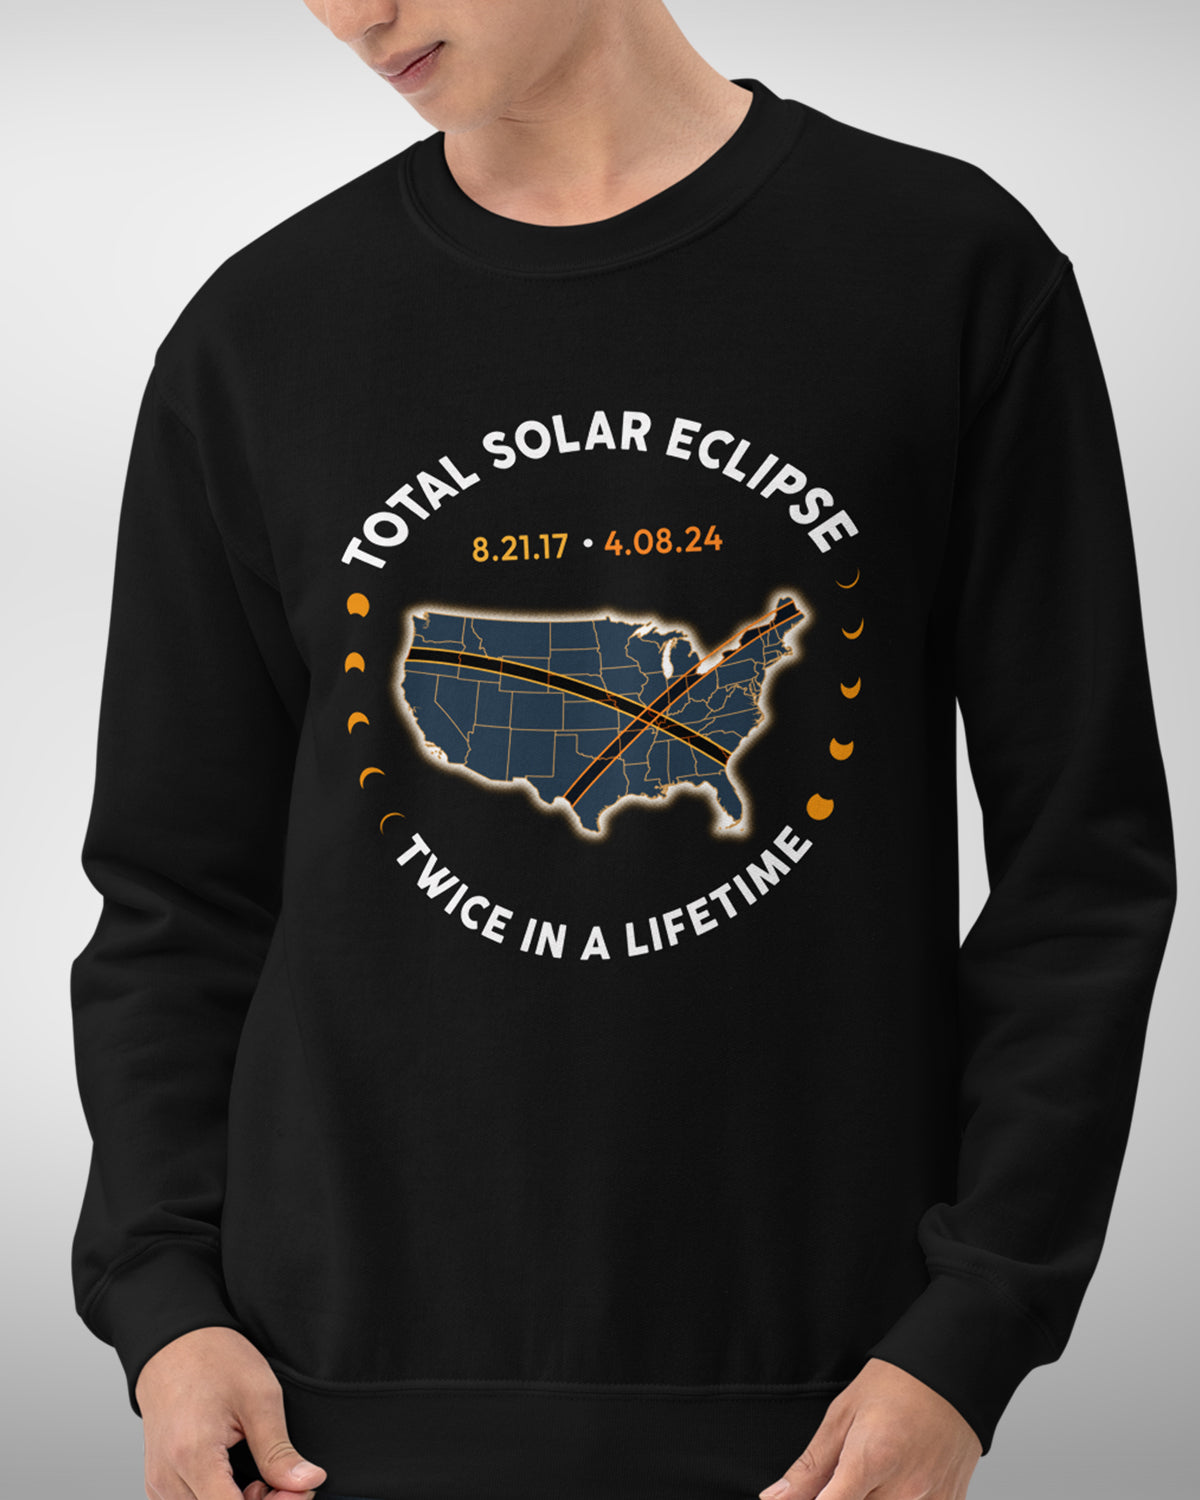 Twice in a Lifetime Solar Eclipse Sweater 2017 2024, April 8, USA Map Sweatshirt, Great American Eclipse Path of Totality